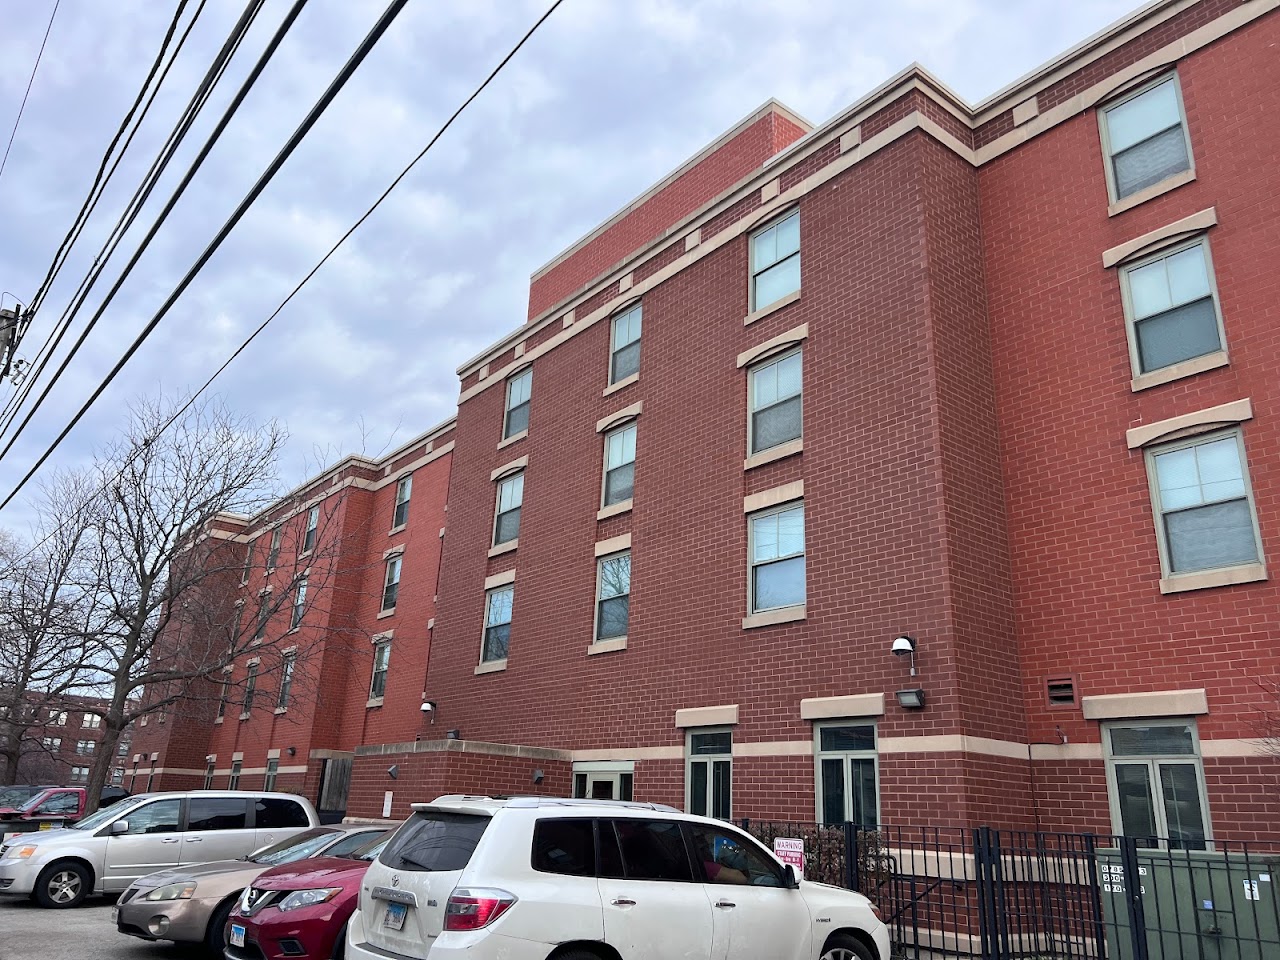 Photo of ST LEO RESIDENCE. Affordable housing located at 7750 S EMERALD AVE CHICAGO, IL 60620